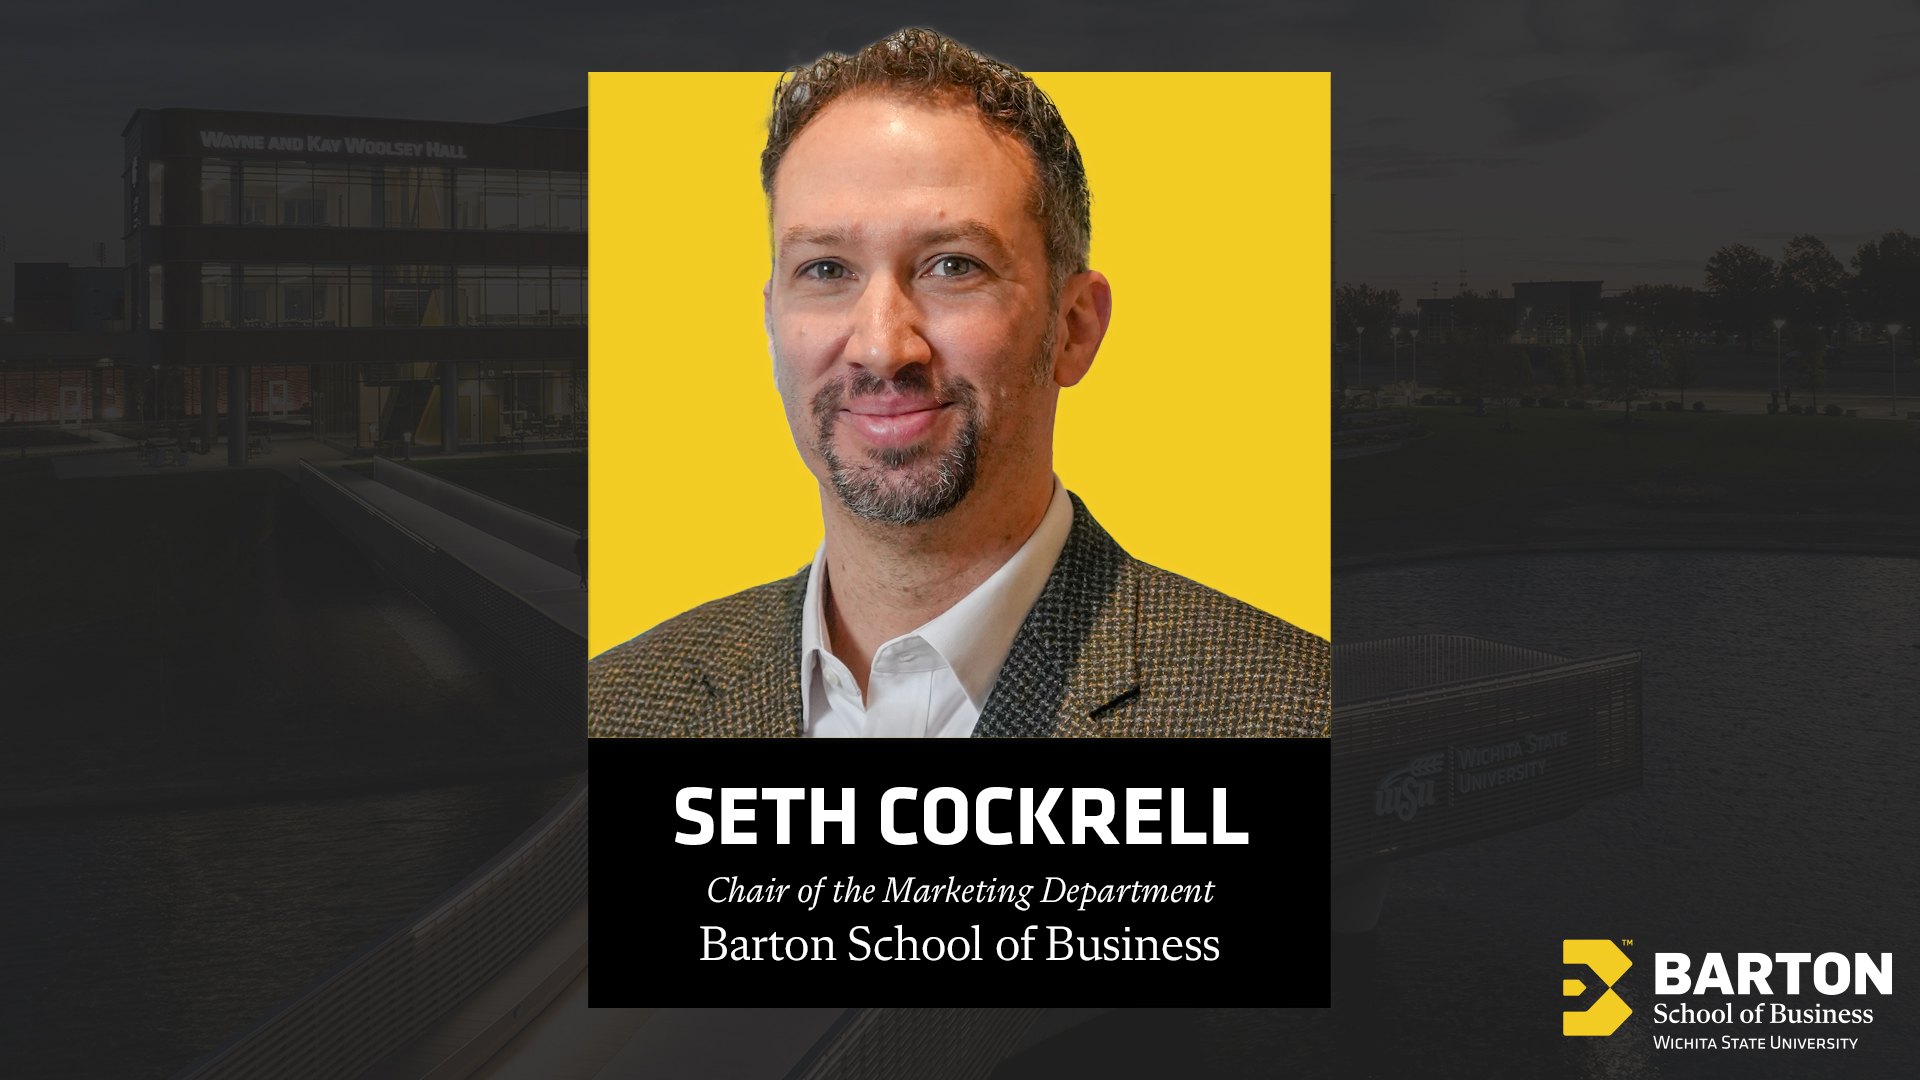 Seth Cockrell, the next Chair of the Marketing Department.